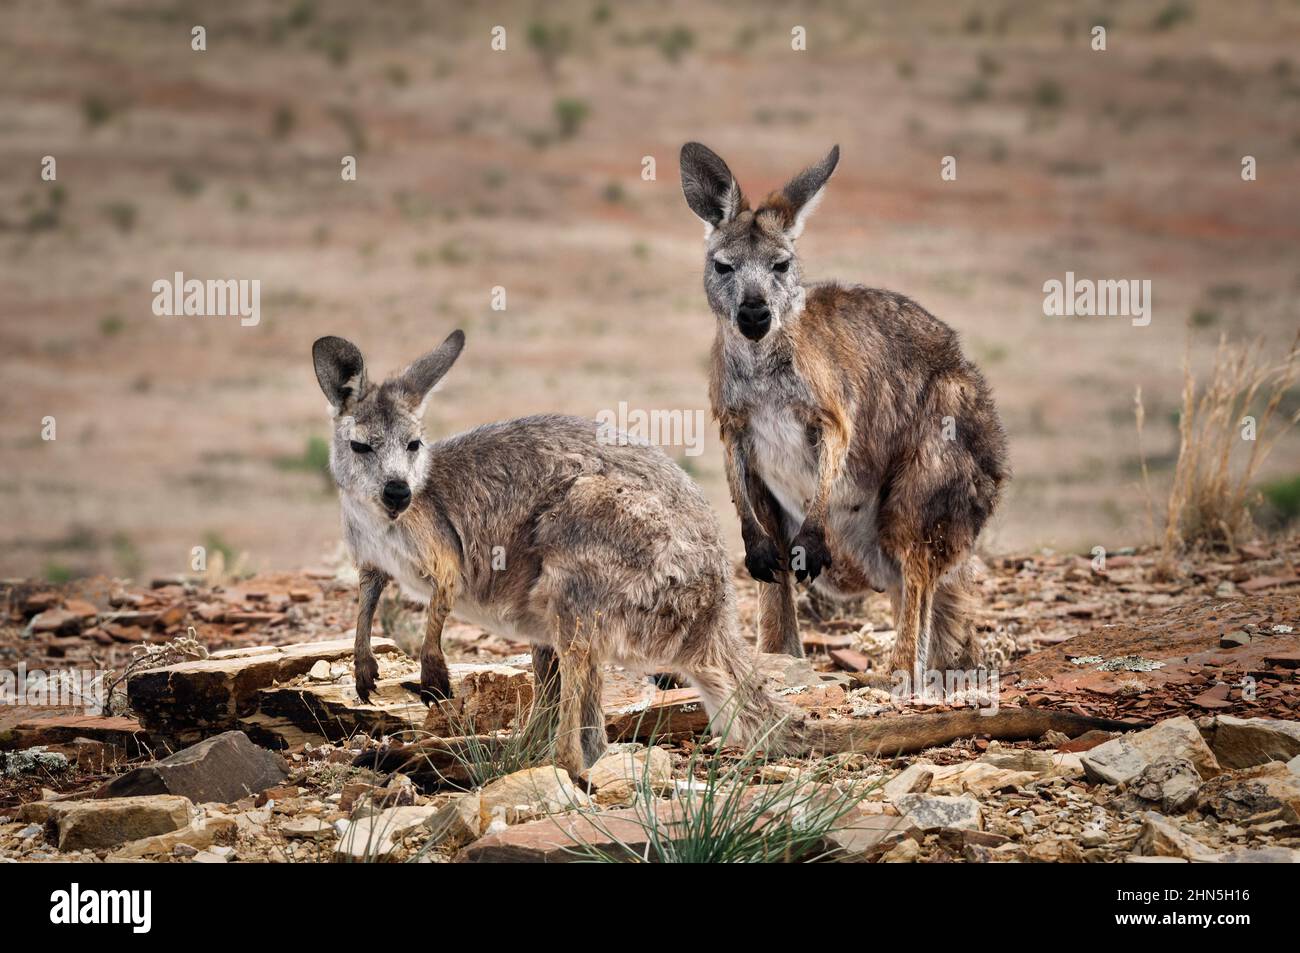 Euro mother and joey in the dry australian outback. Stock Photo